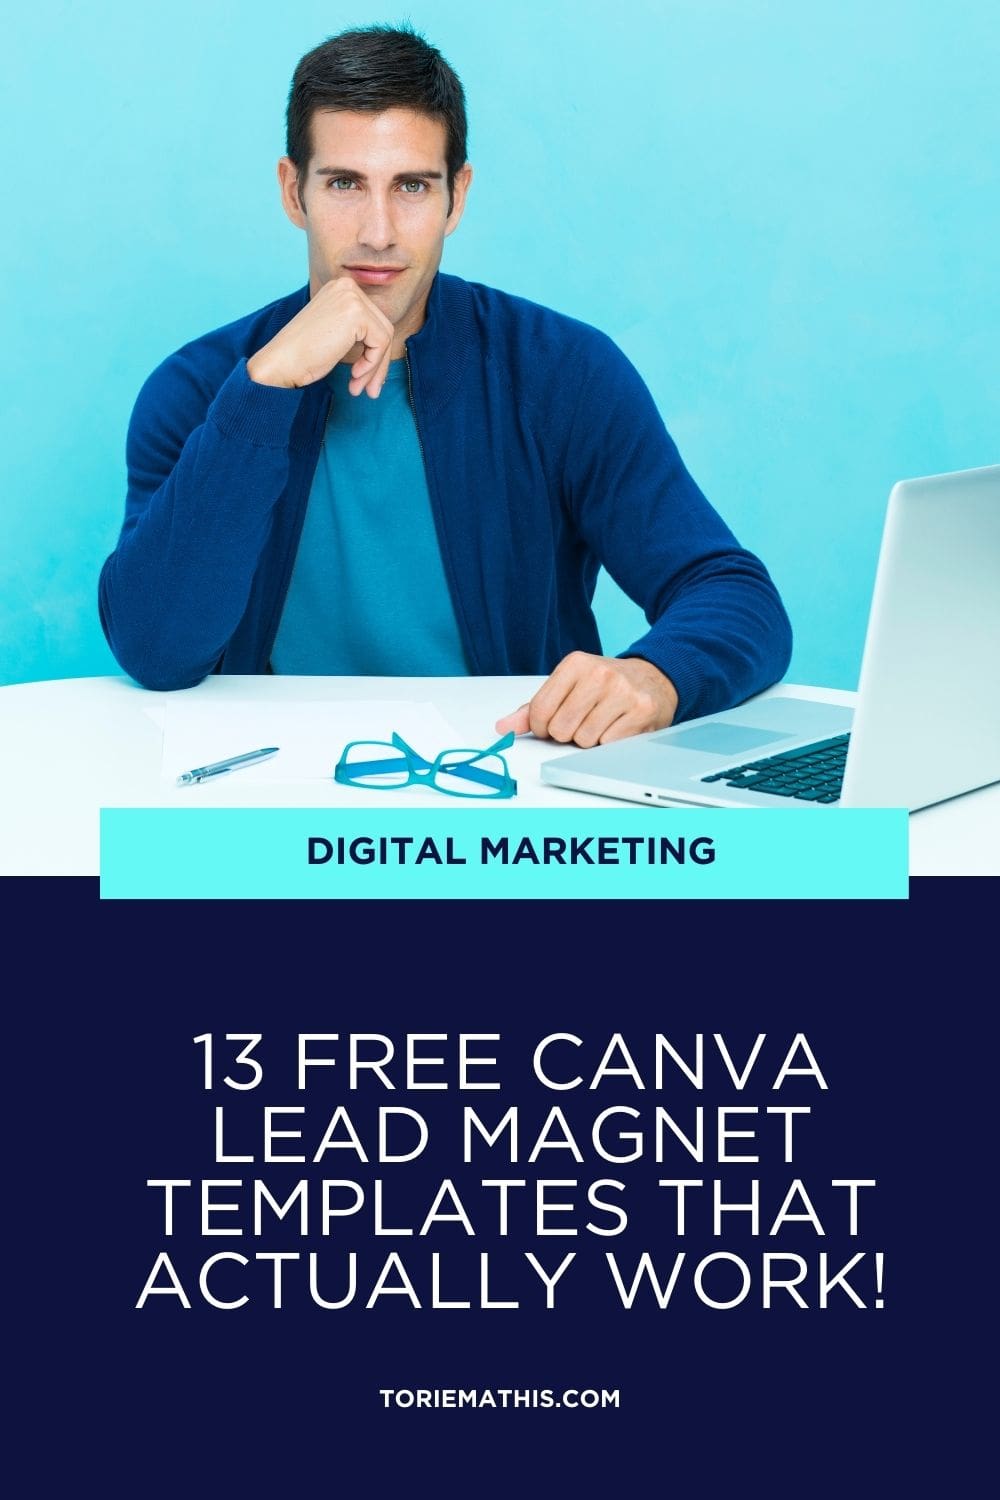 13 Free Canva Lead Magnet Templates That Actually Work!